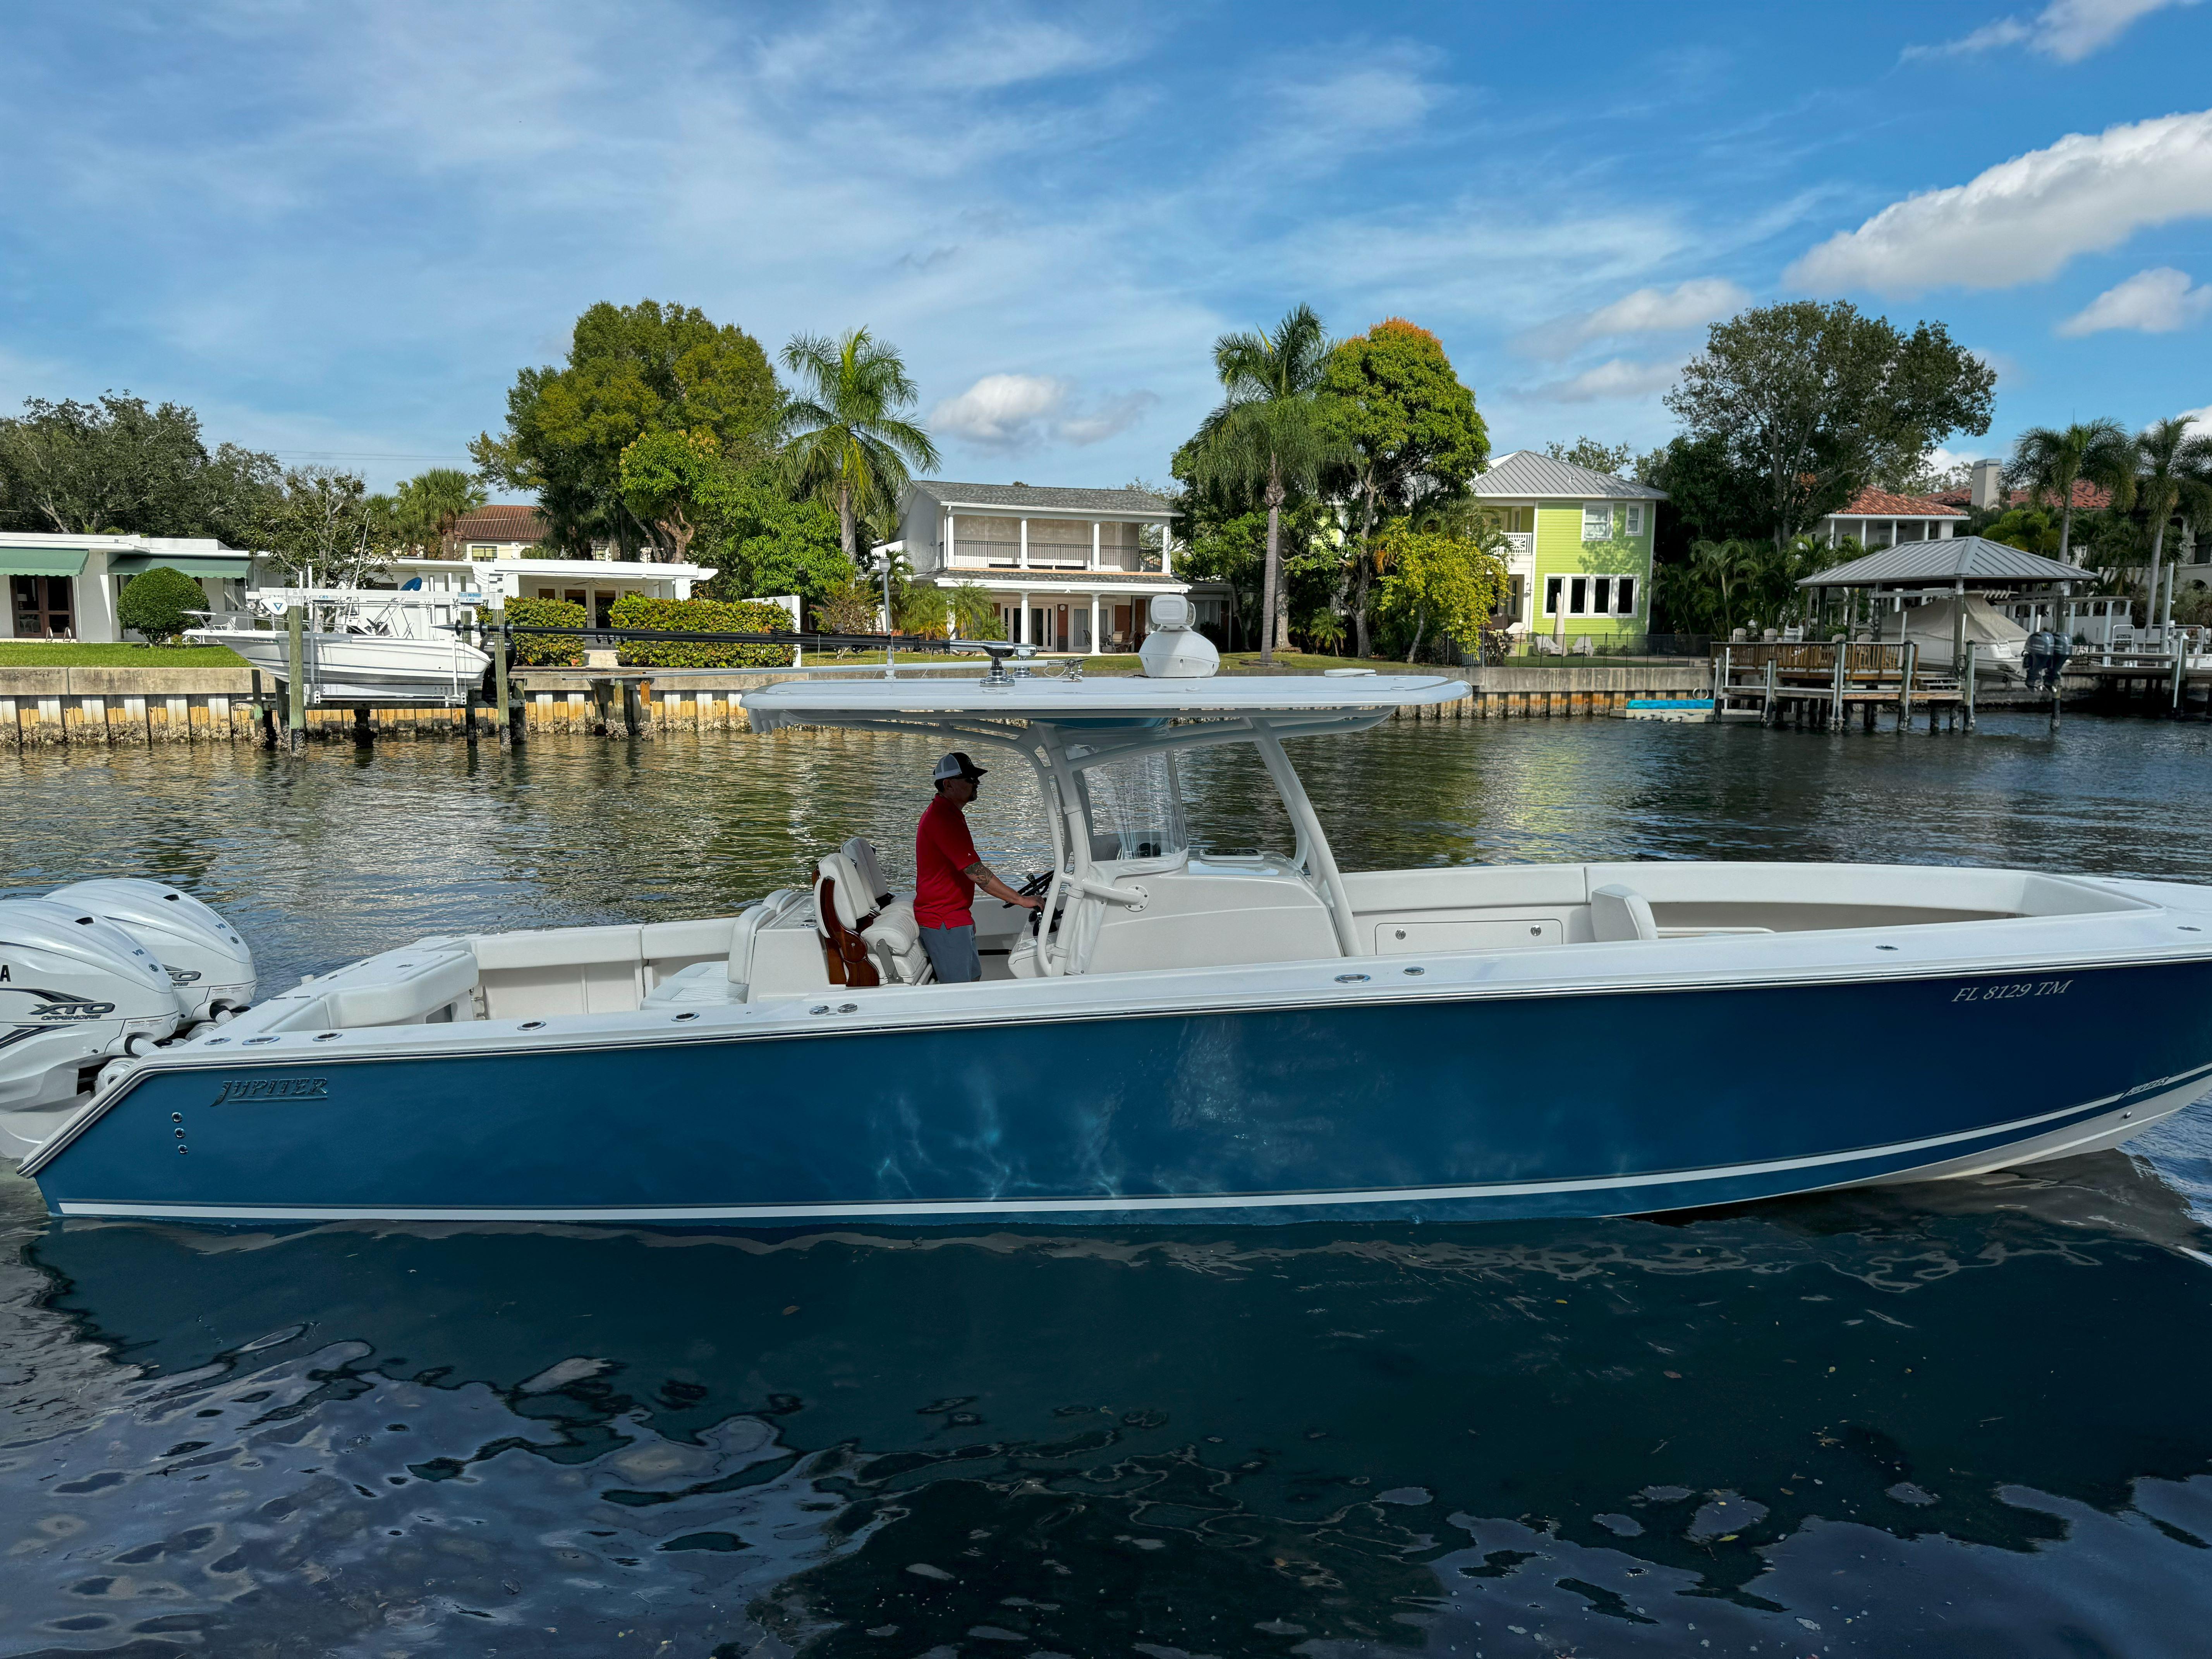 2020 Jupiter 38 Center Console for sale - YachtWorld